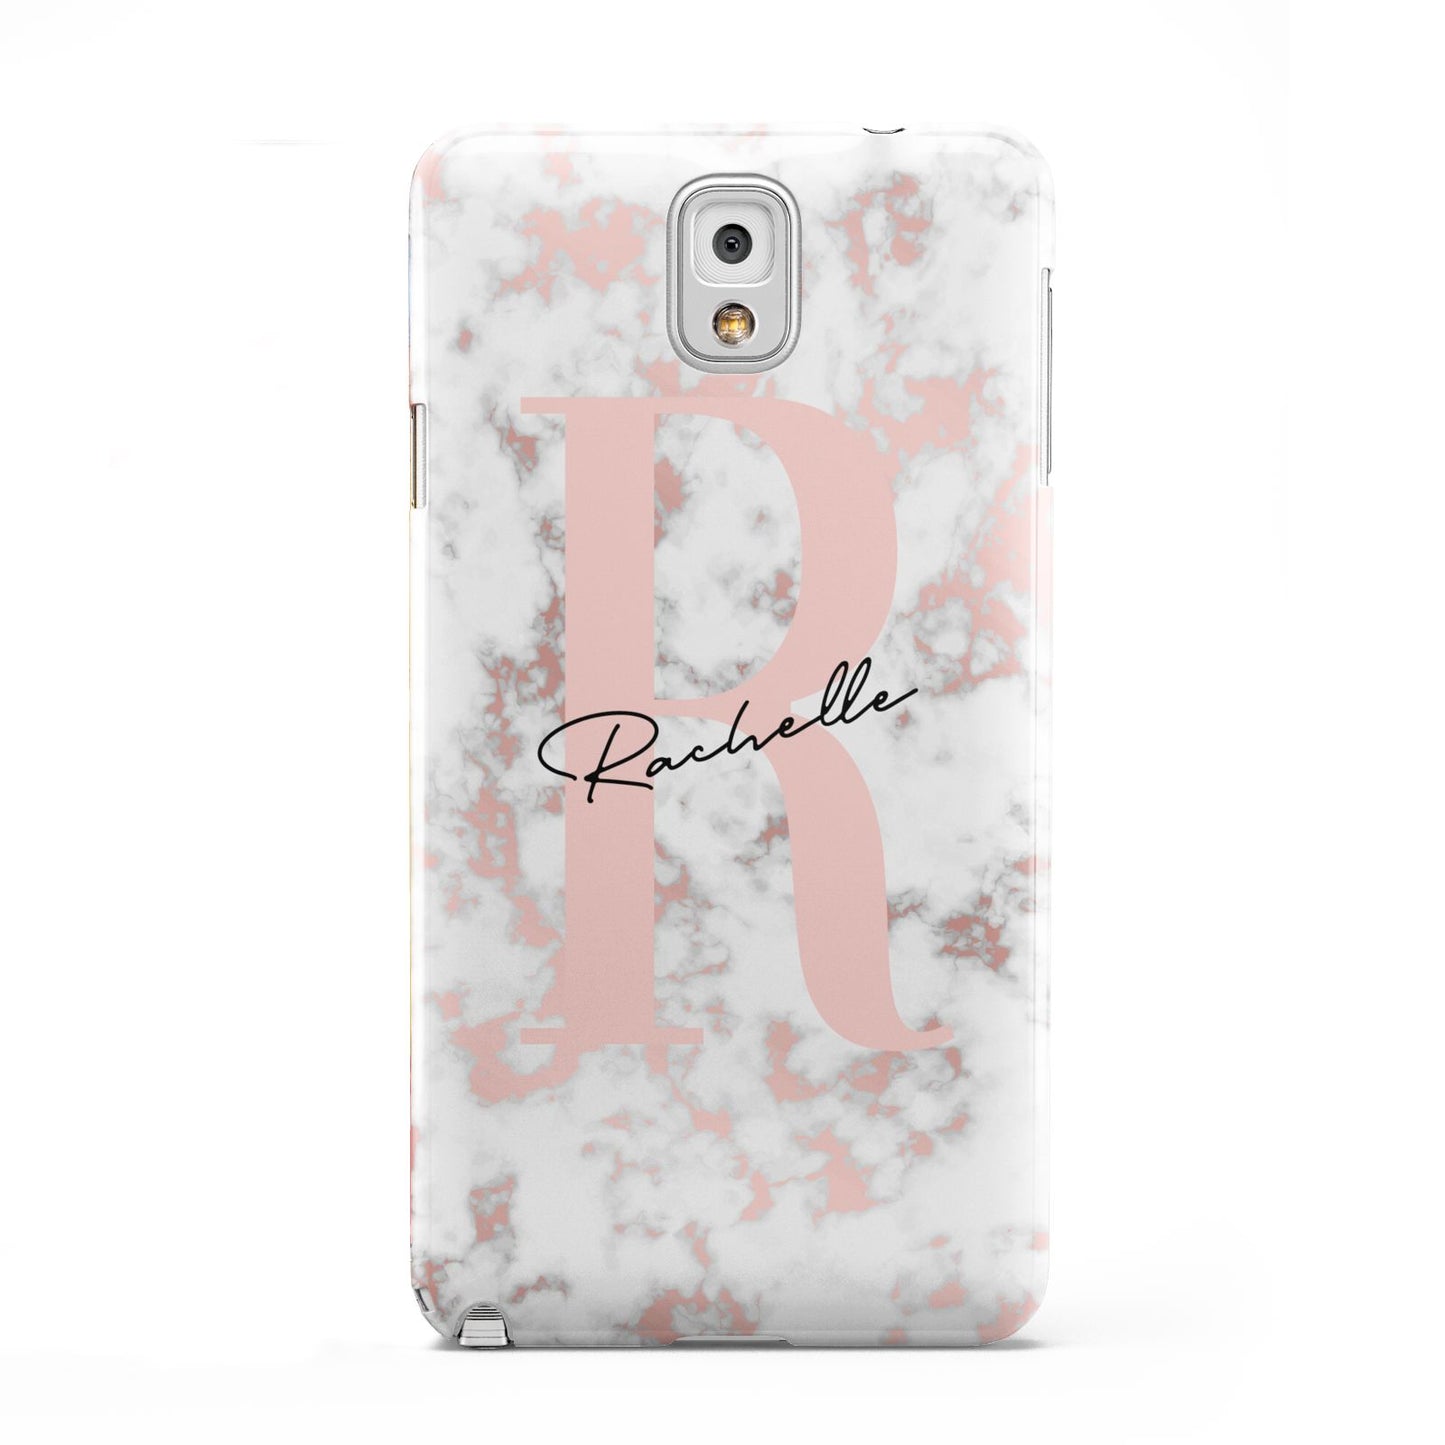 Monogrammed Rose Gold Marble Samsung Galaxy Note 3 Case